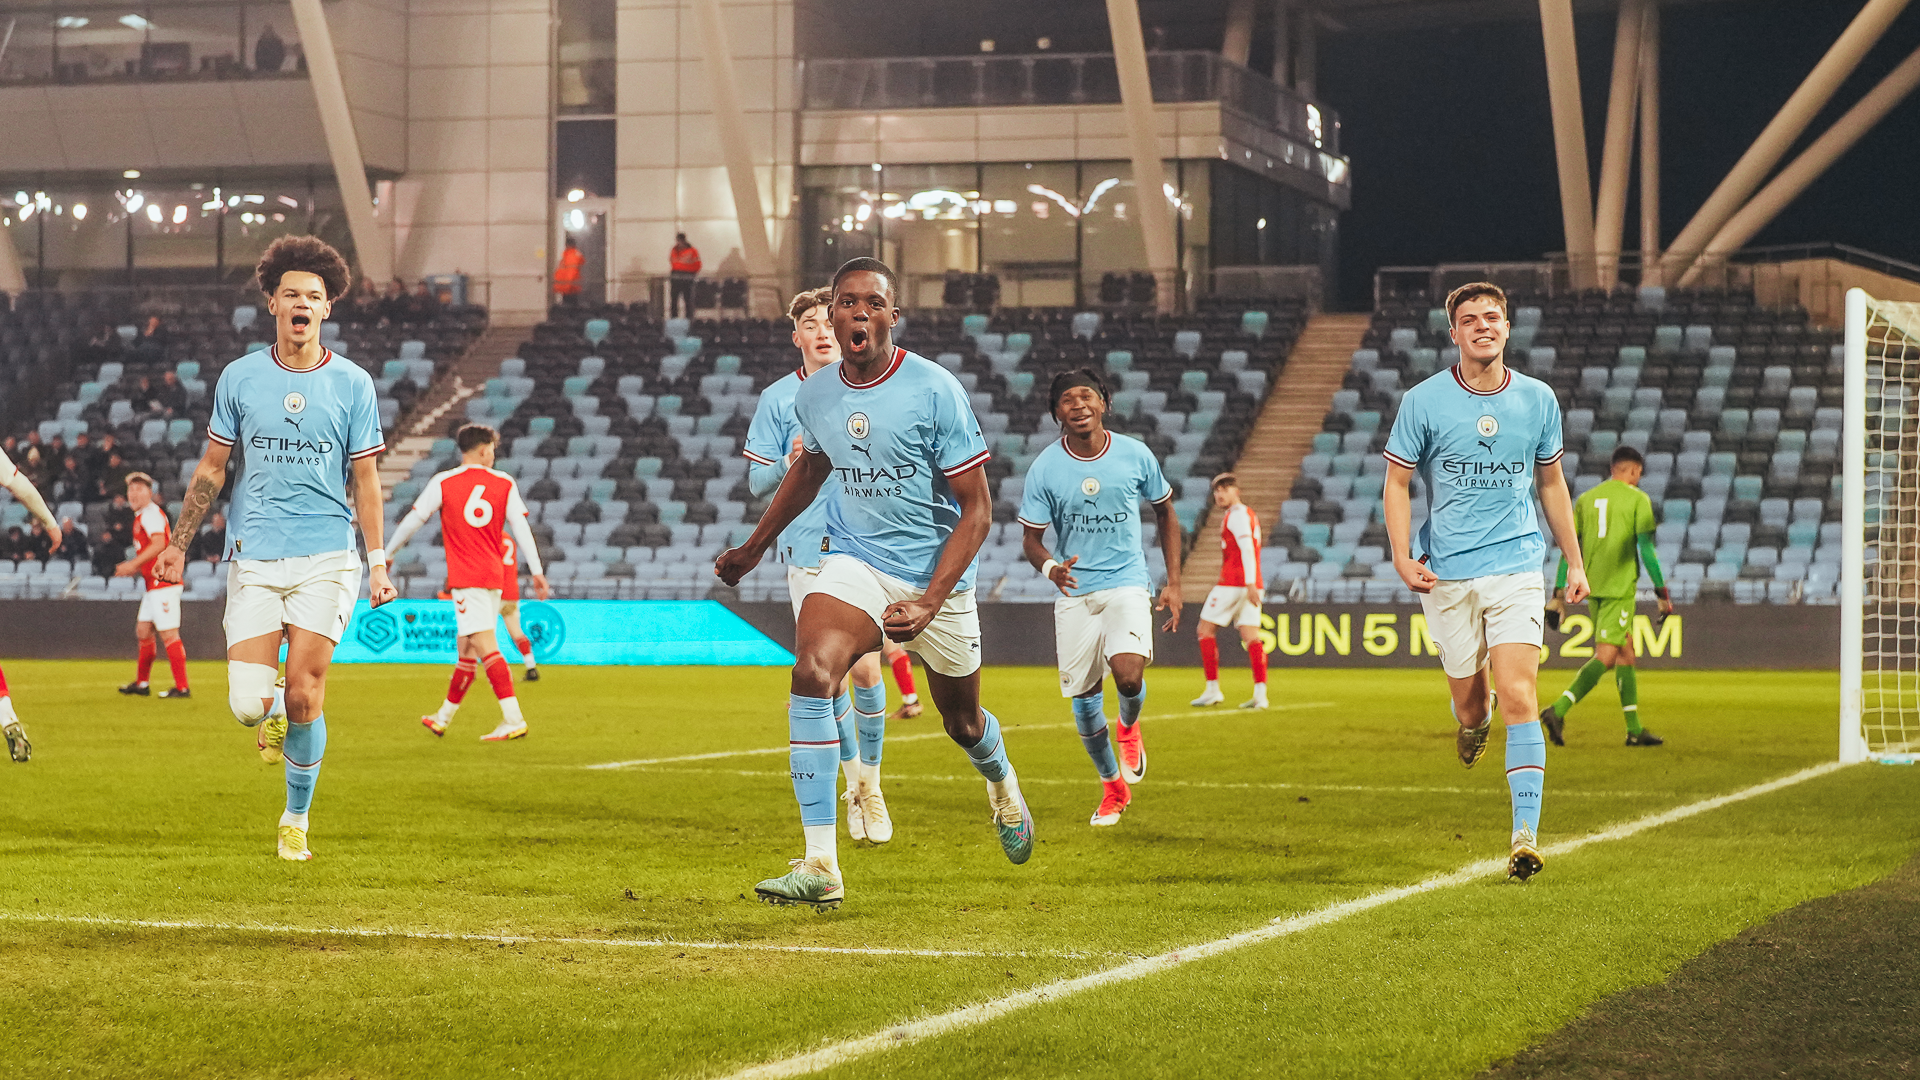 CELEBRATION TIME: Justin Oboavwoduo and his team mates are all smiles after City's opener.